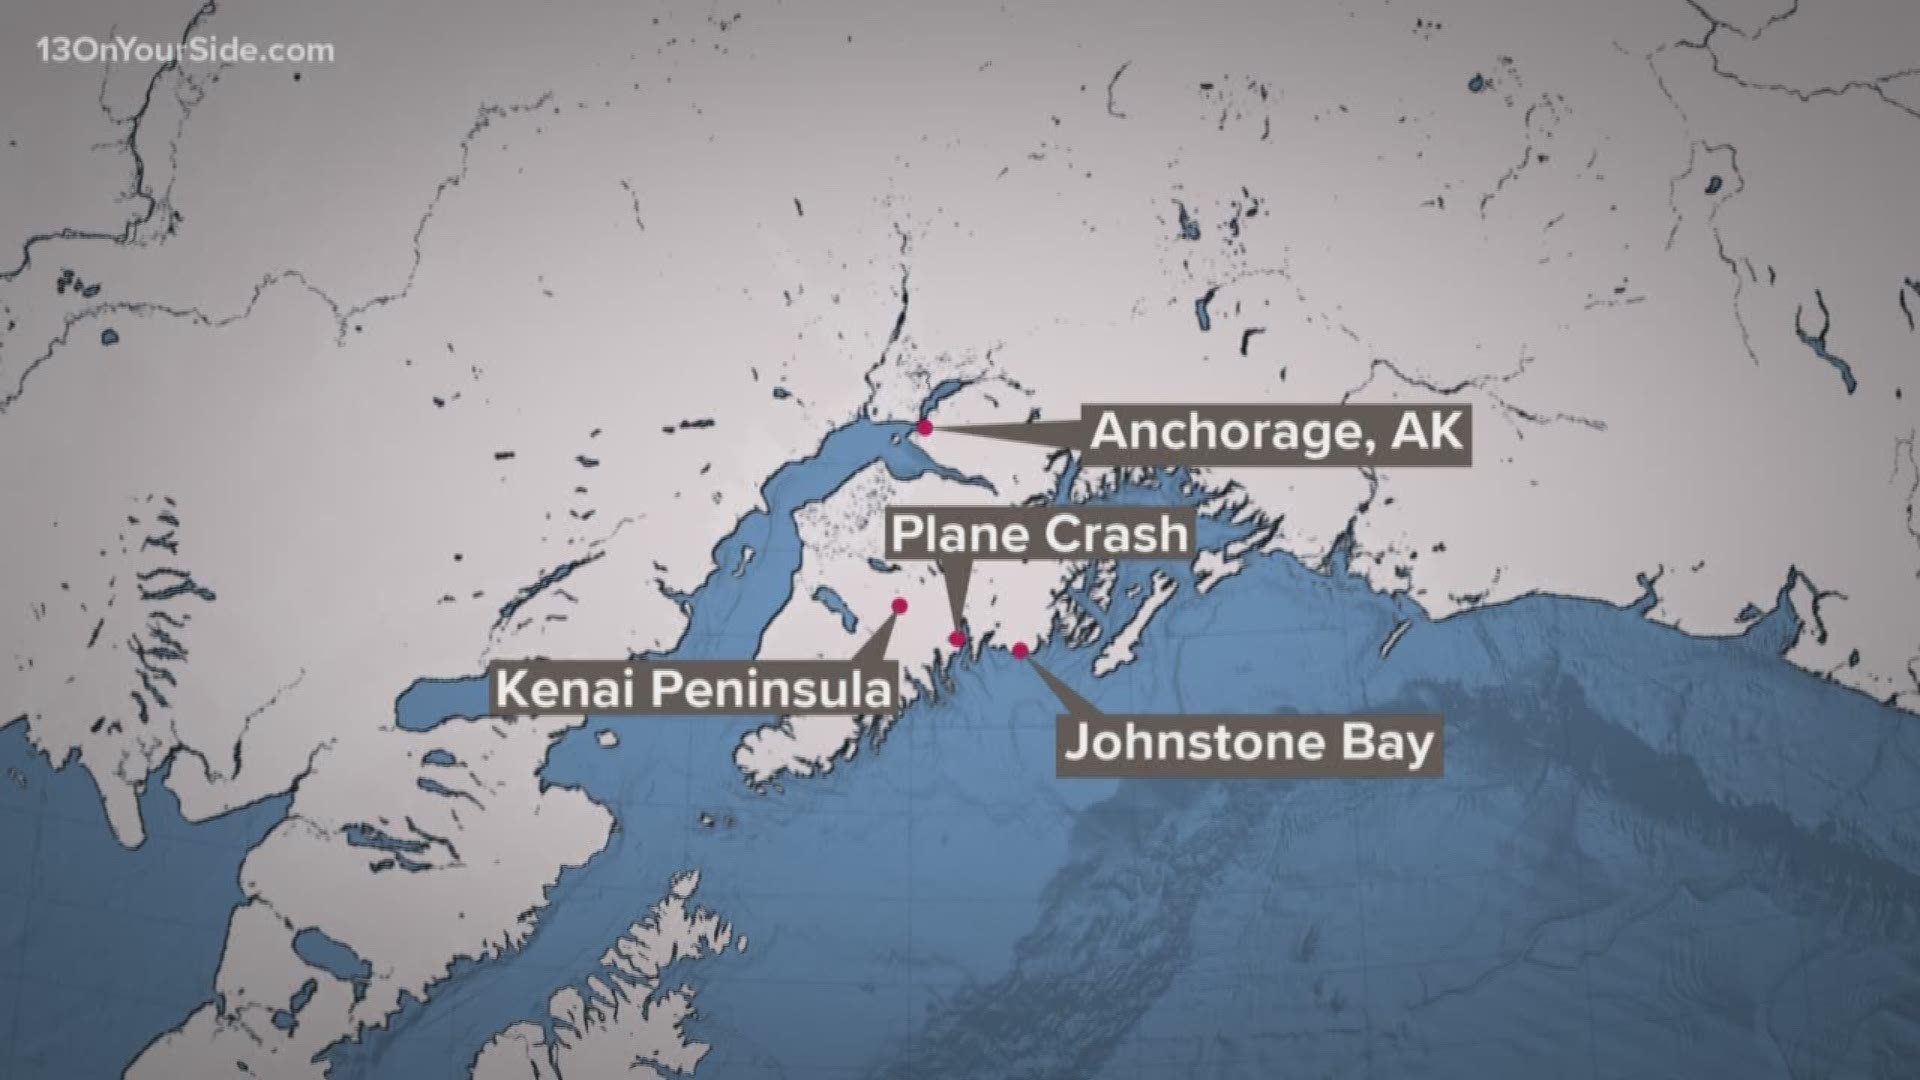 Alaska State Troopers say three people, including a couple from West Michigan, were killed when a small plane crashed on land near a bay on the Kenai Peninsula.